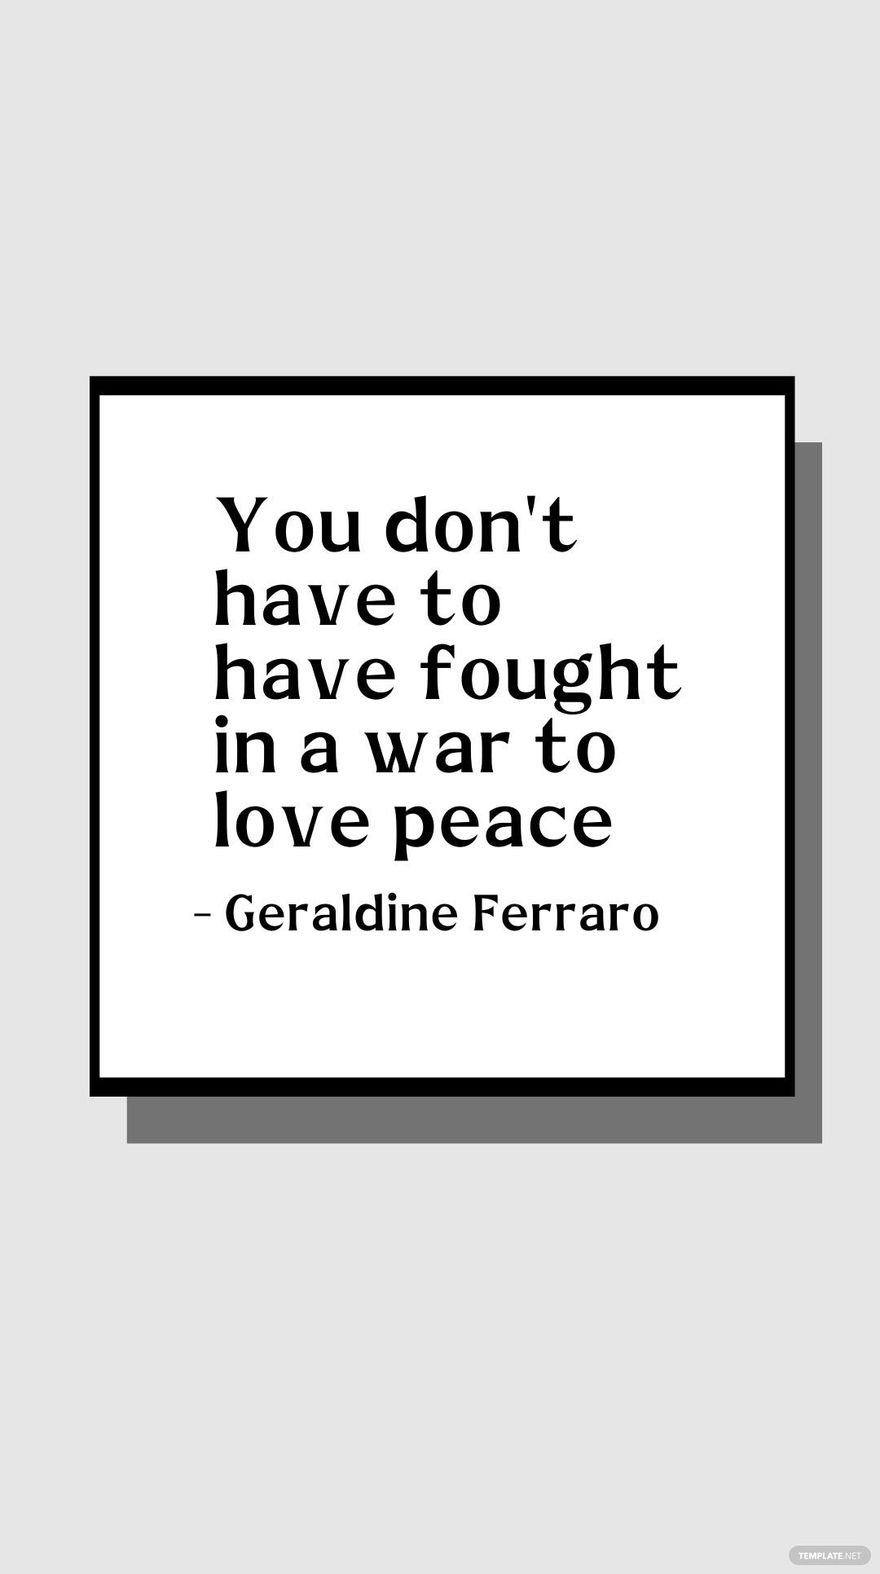 Free Geraldine Ferraro - You don't have to have fought in a war to love peace in JPG